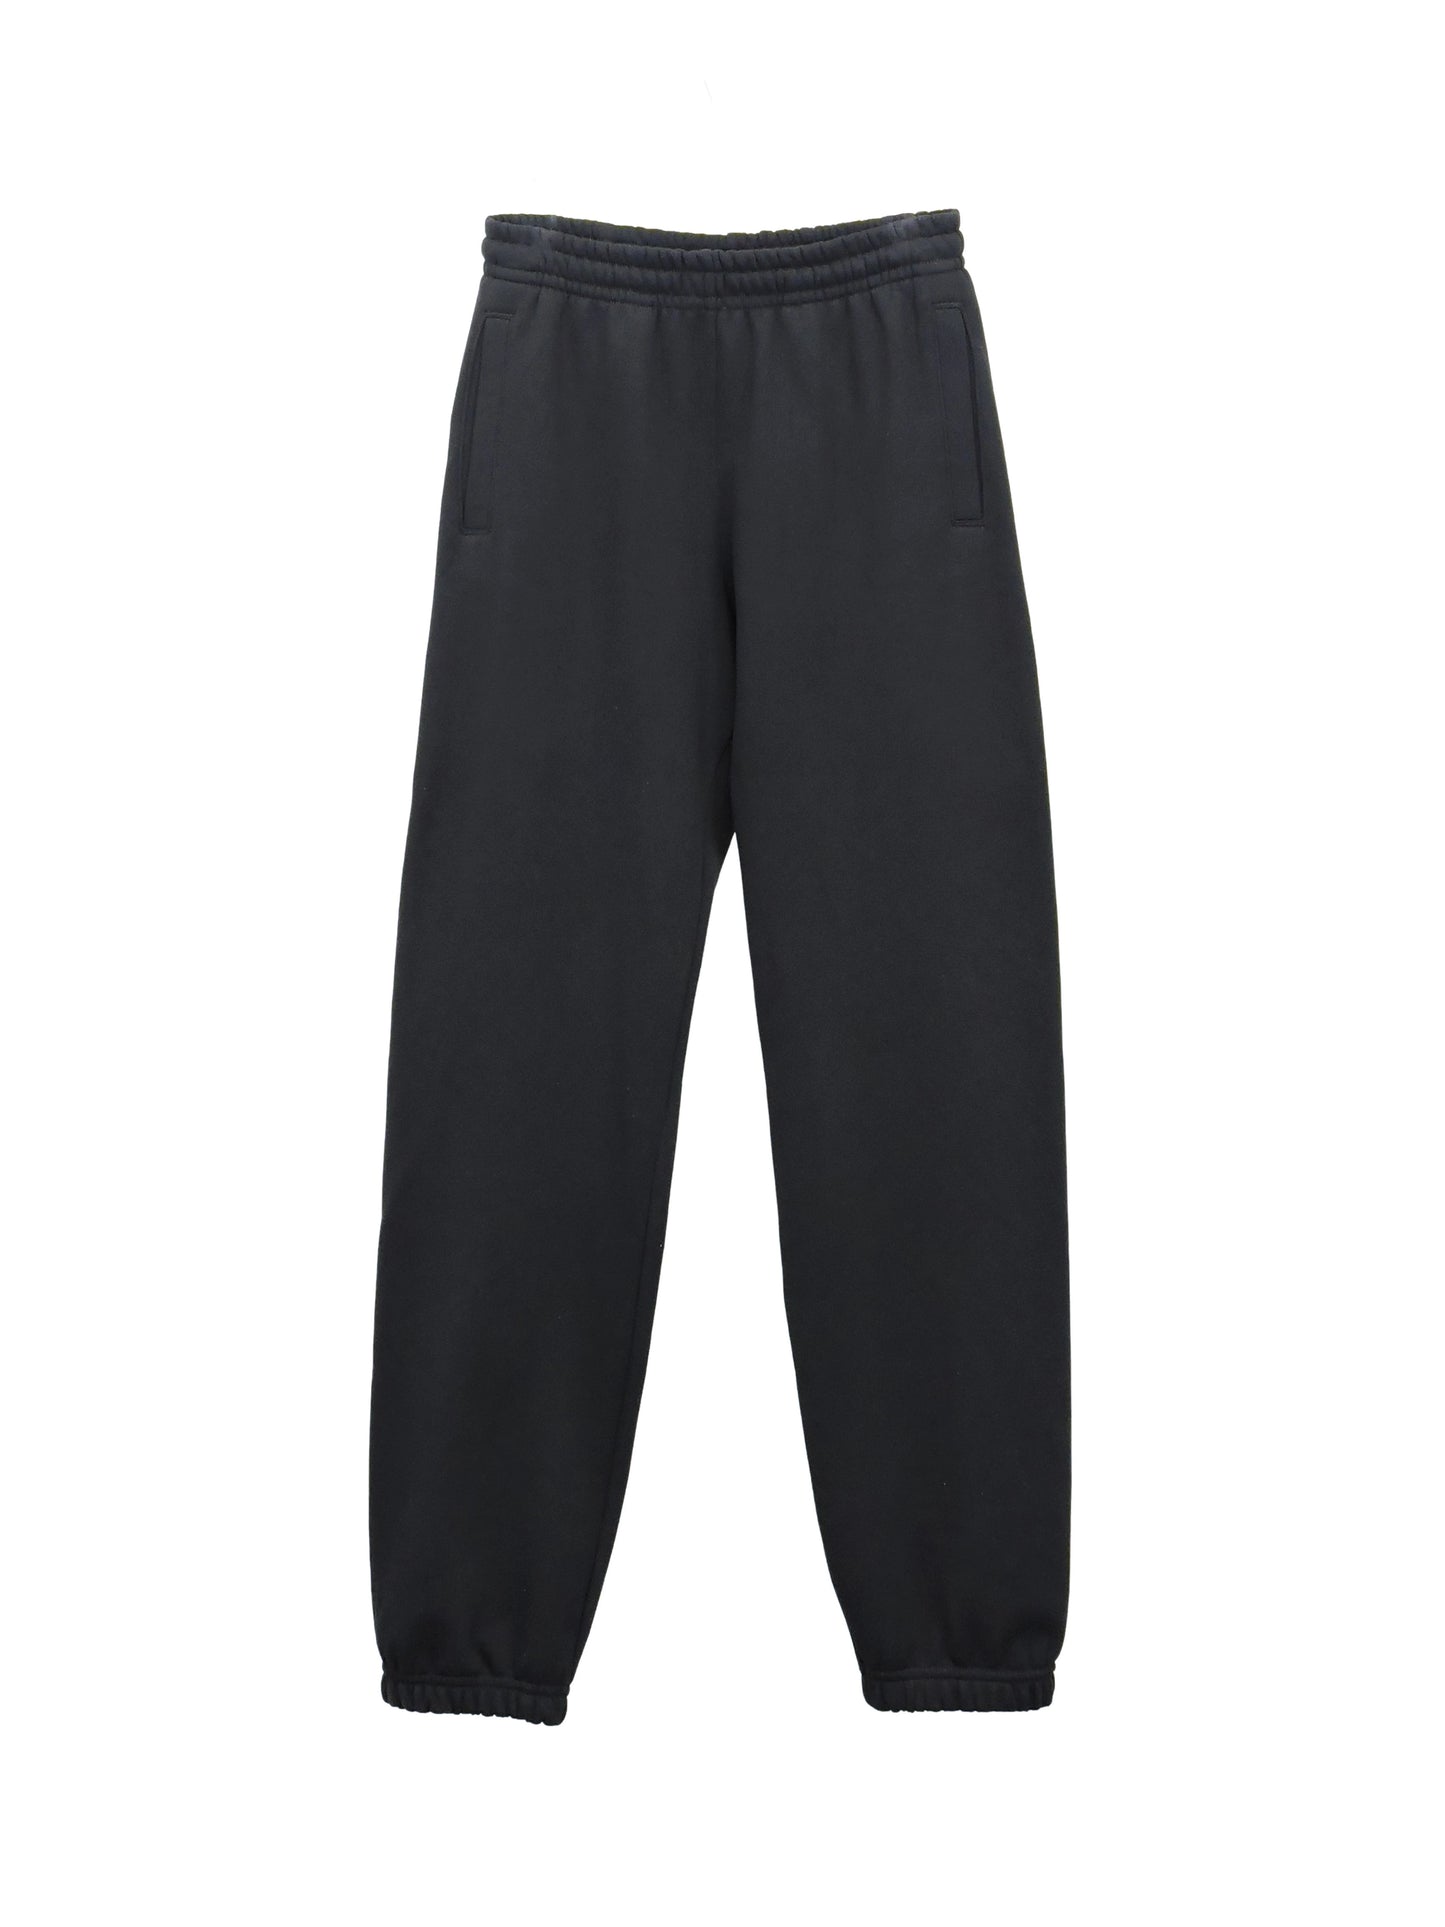 French Terry Sweatpants in Black